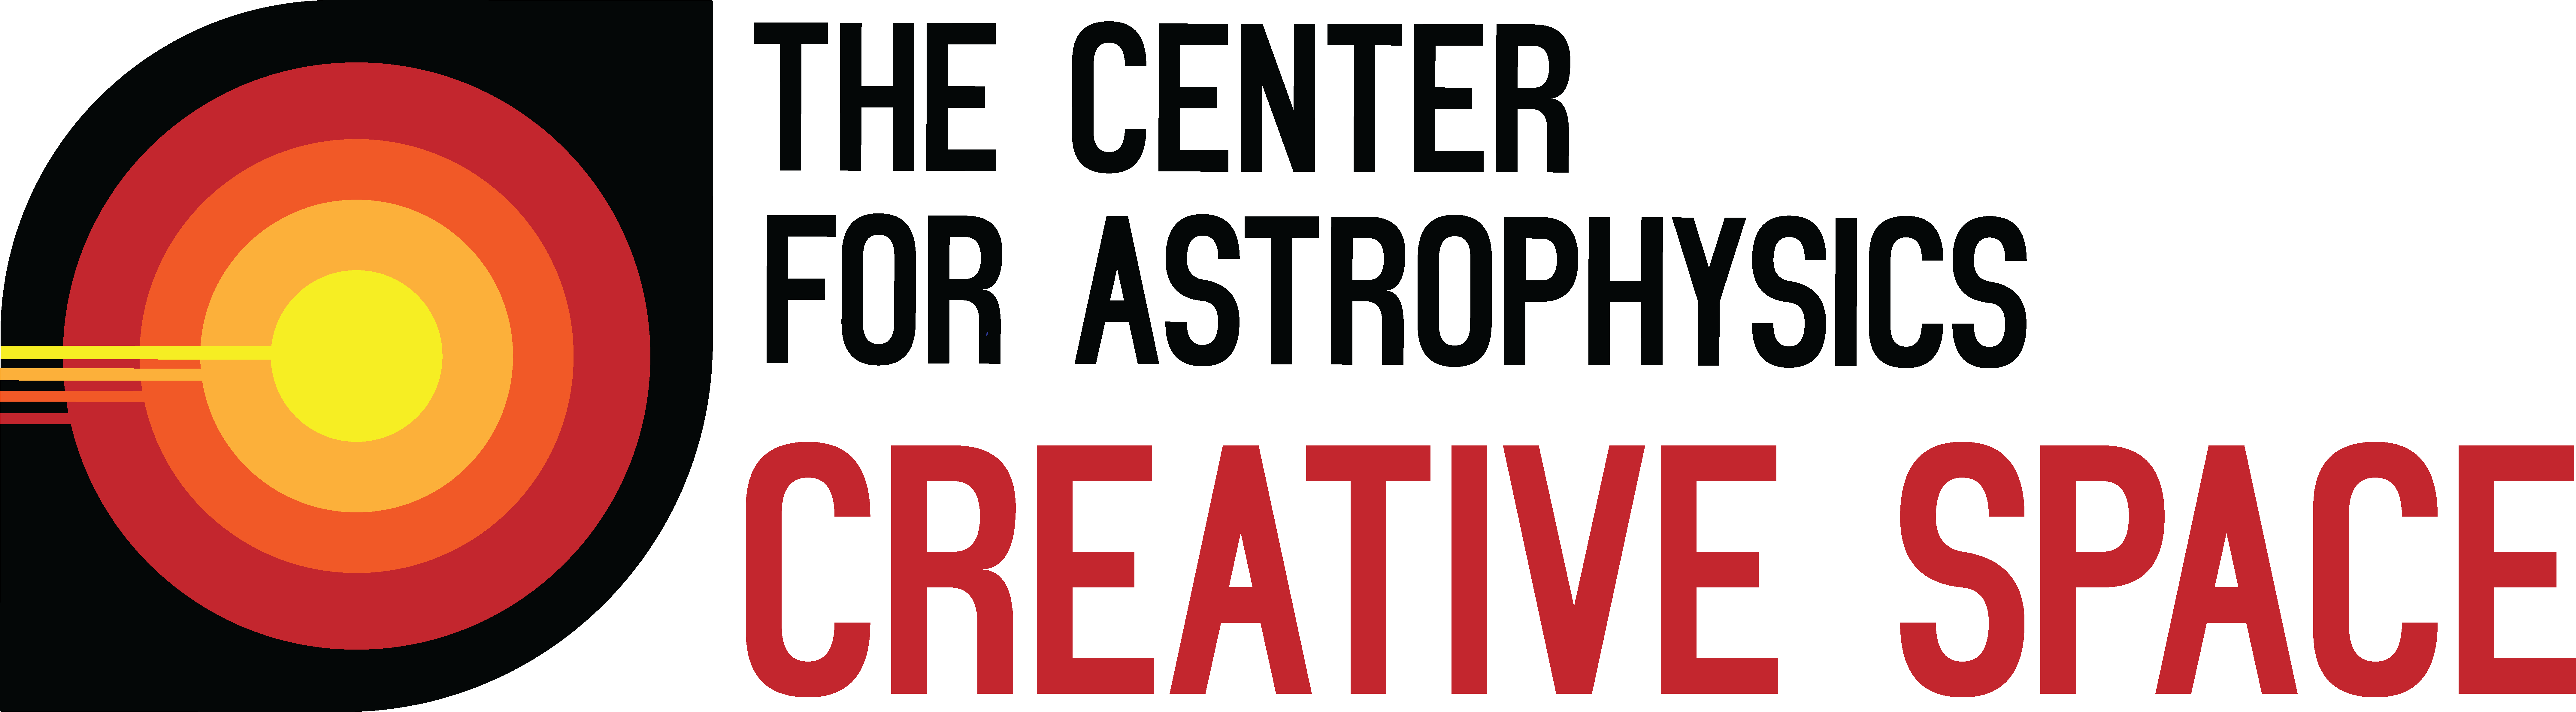 Creative Space at the Center for Astrophysics pic